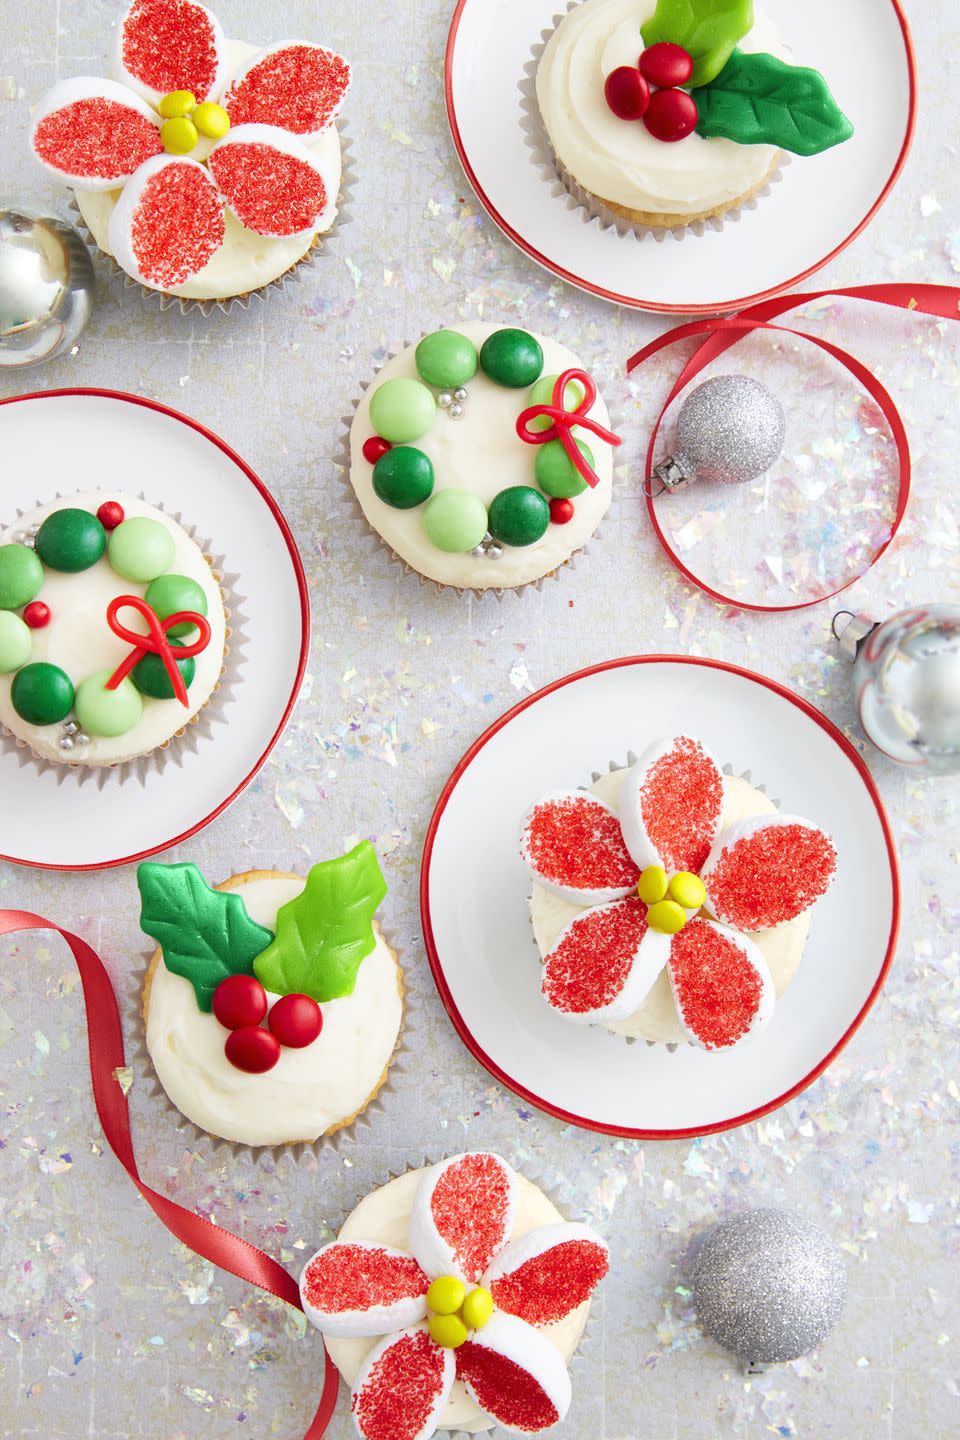 Christmas Candy Cupcakes